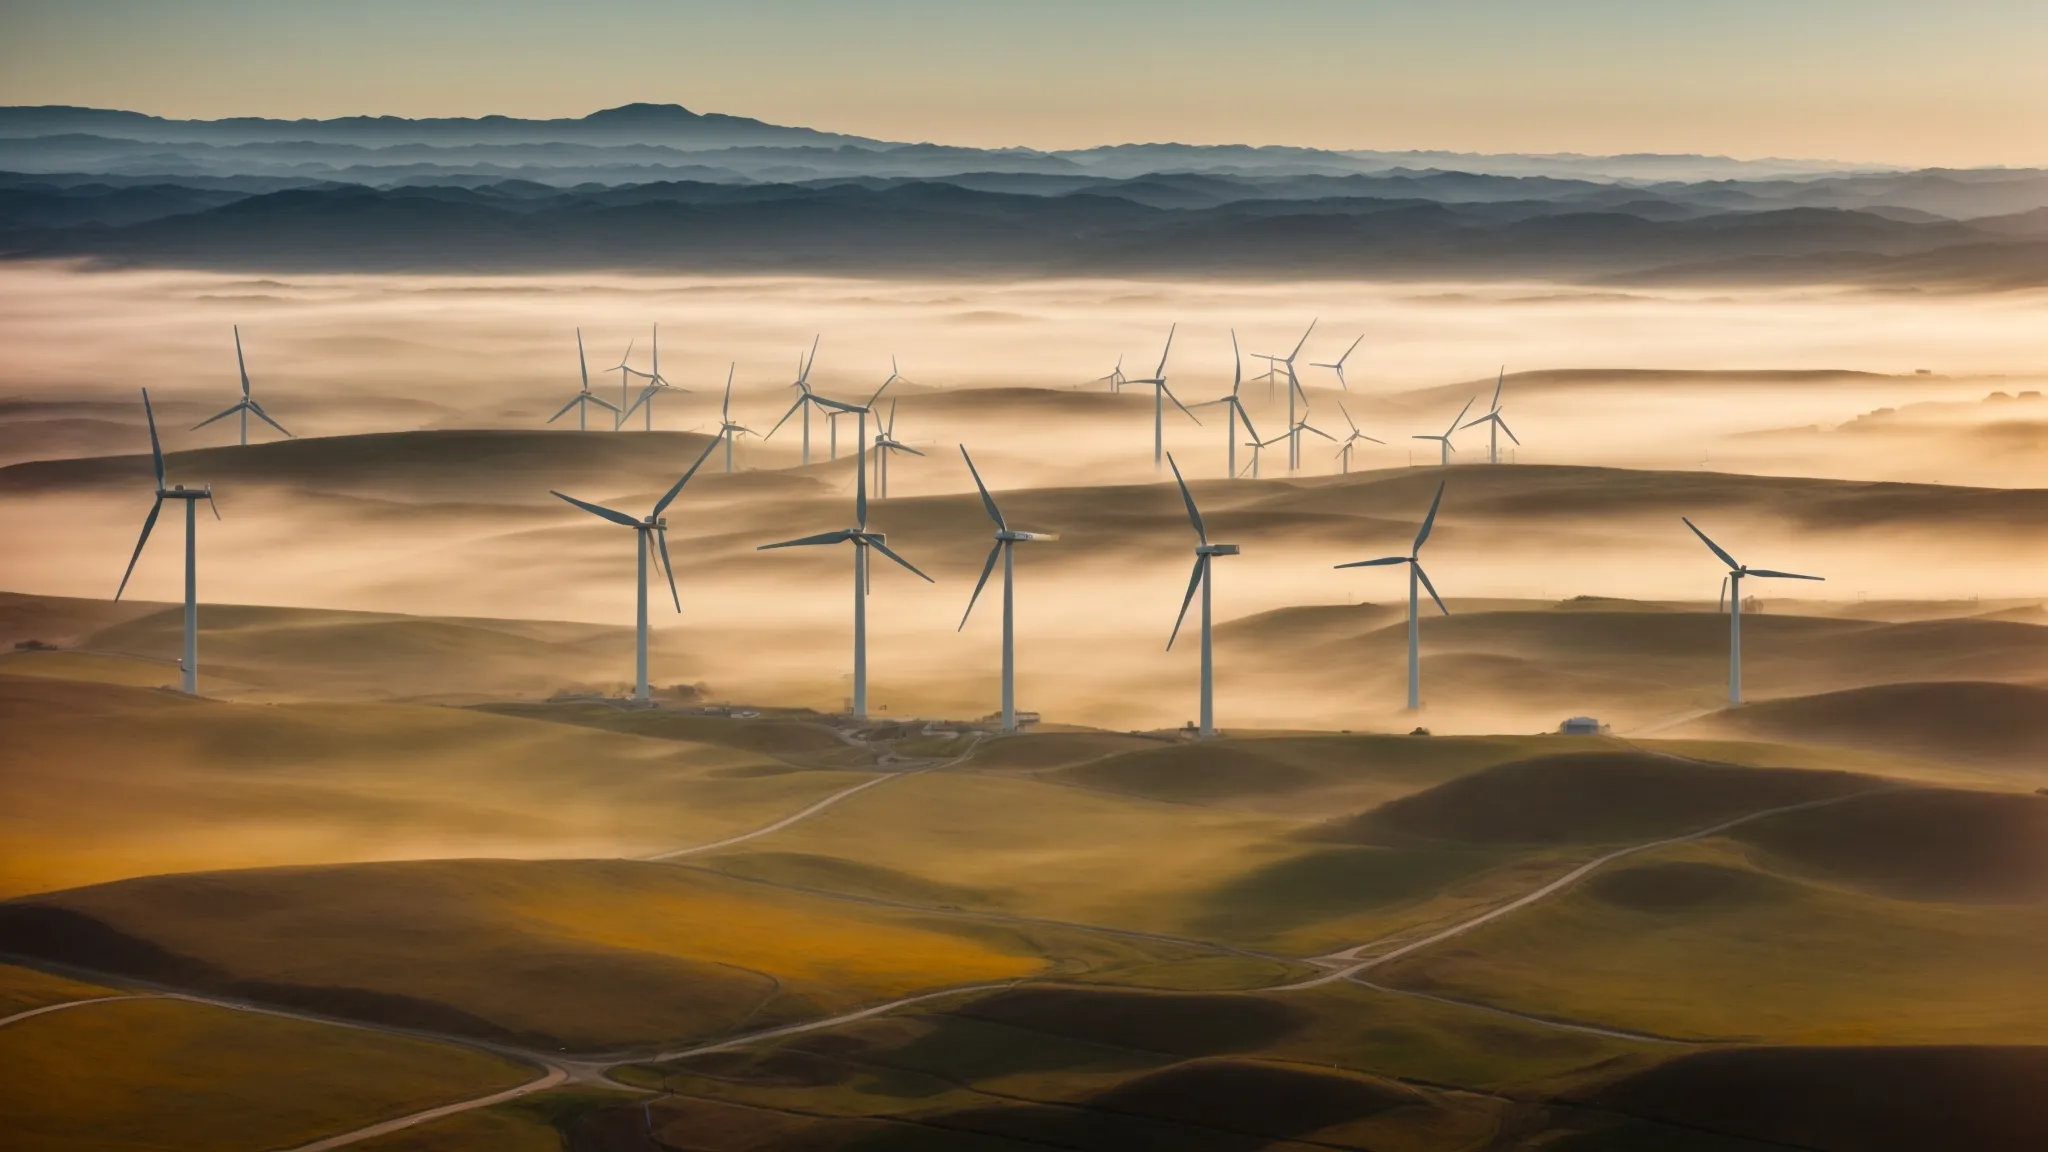 wind turbines and solar panels stretch across a landscape bathed in the early morning light, symbolizing a clean-energy future.